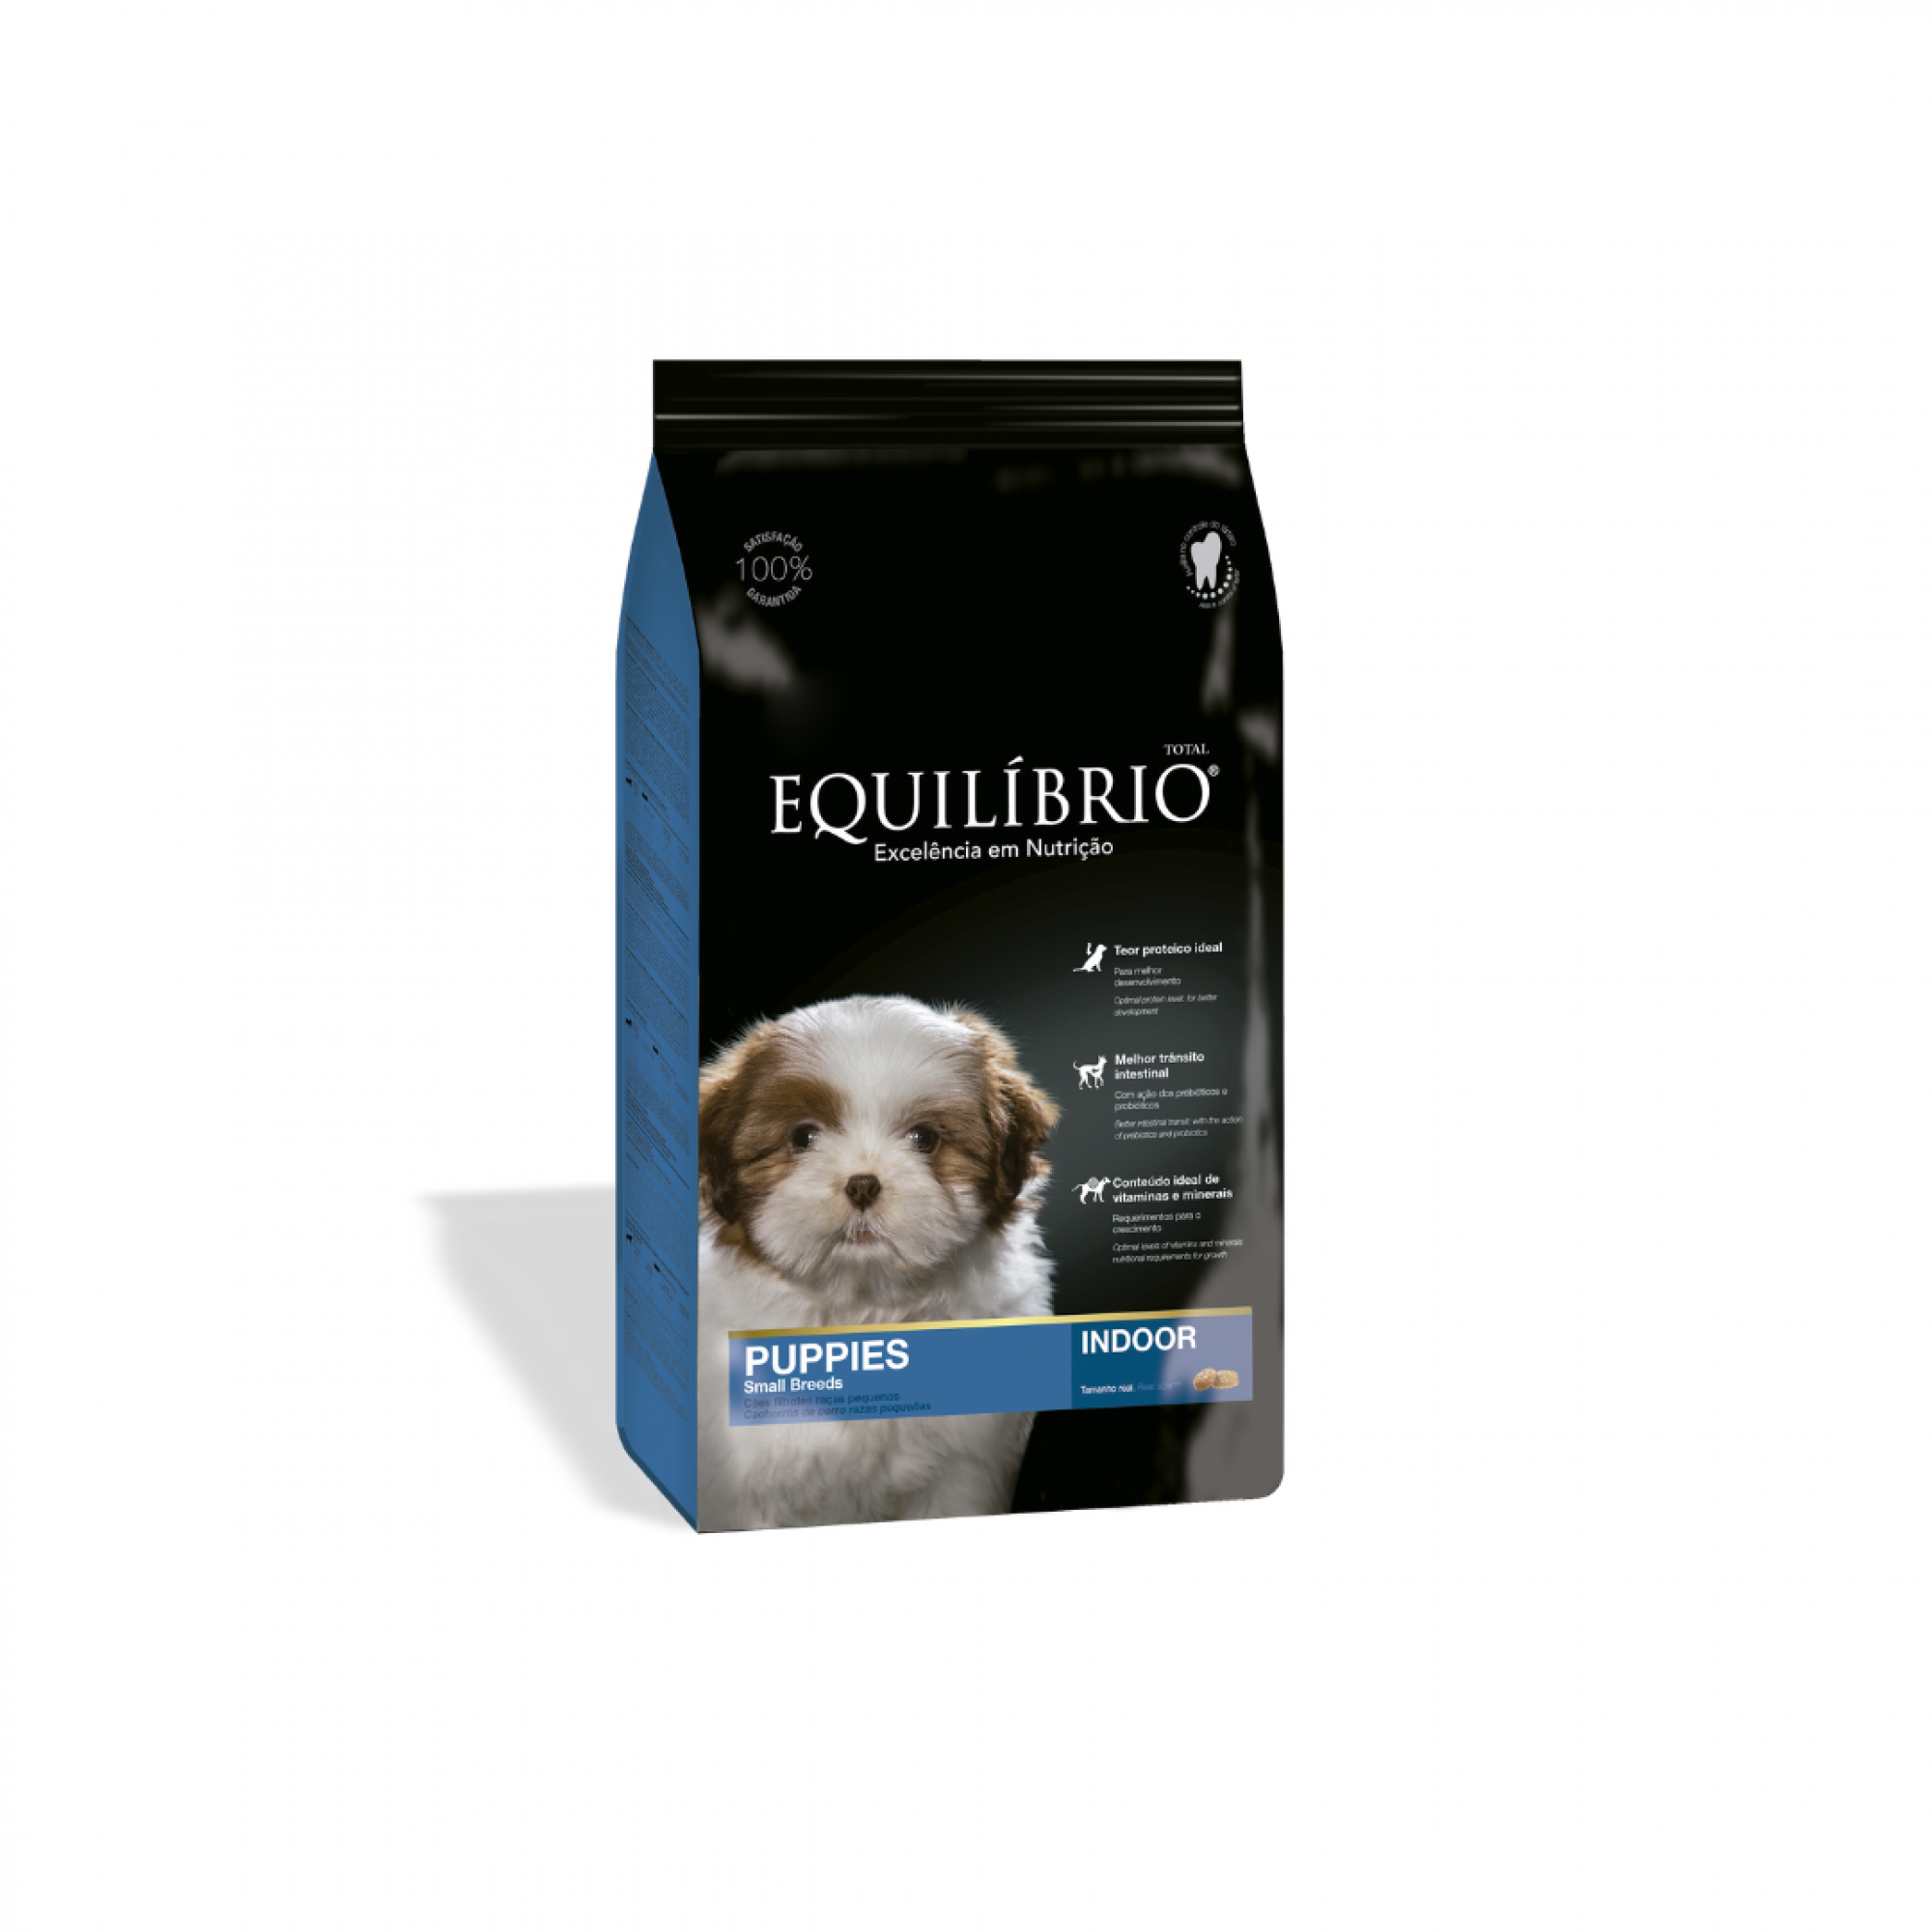 Equilibrio Canine - Puppy Small Breed (Indoor) 2kg